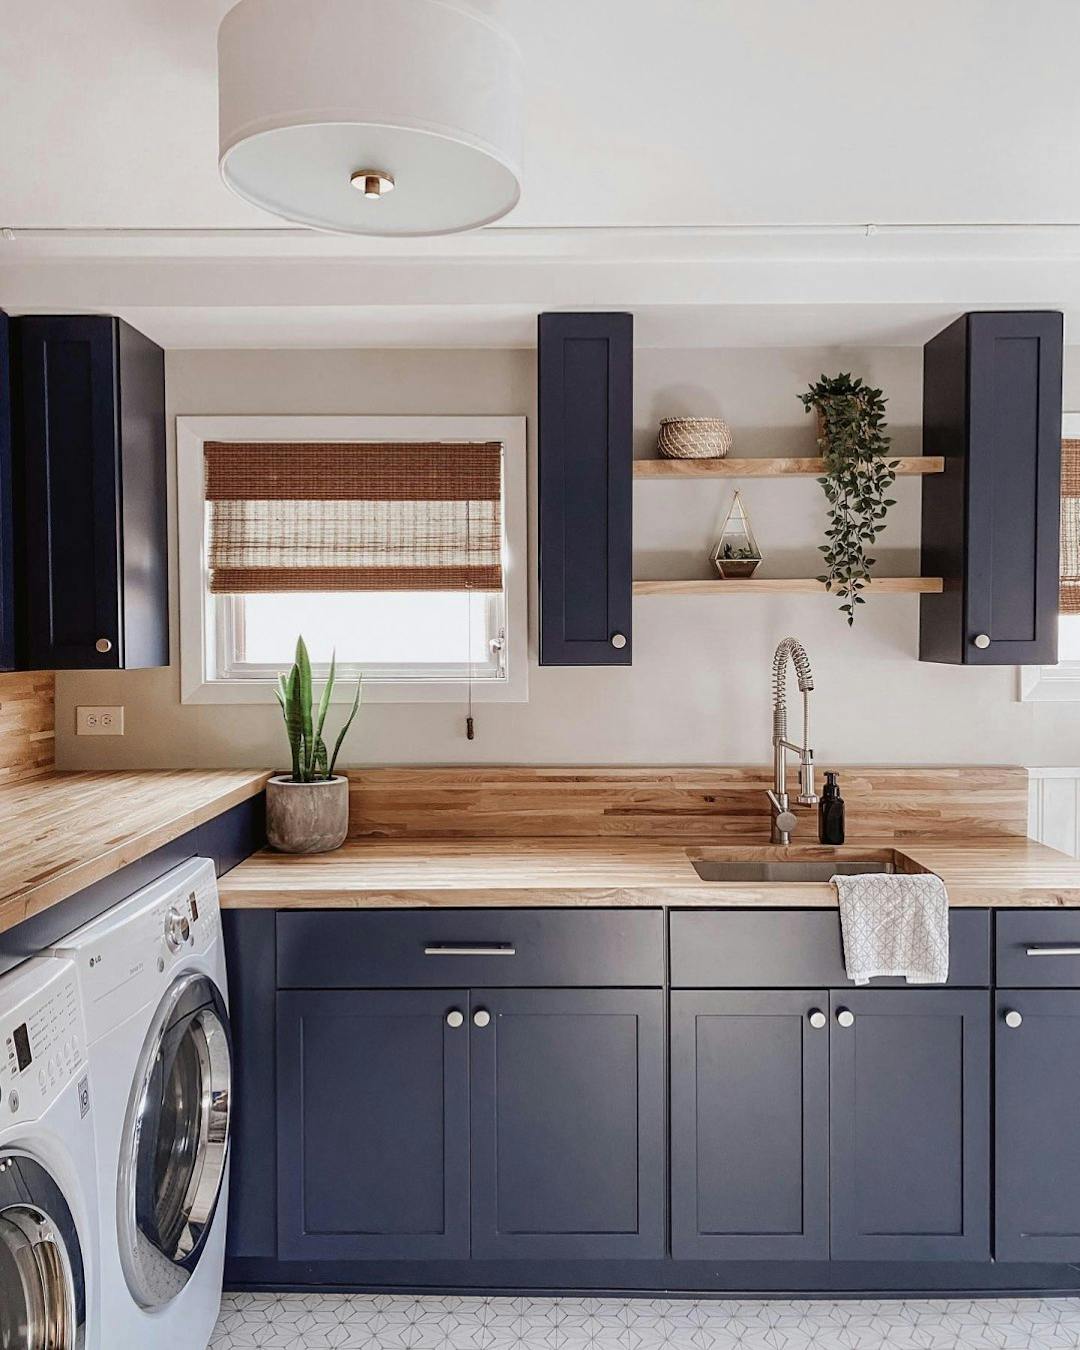 Laundry room with navy blue cabinets and a wood countertop. There is a small snake plant on the counter.